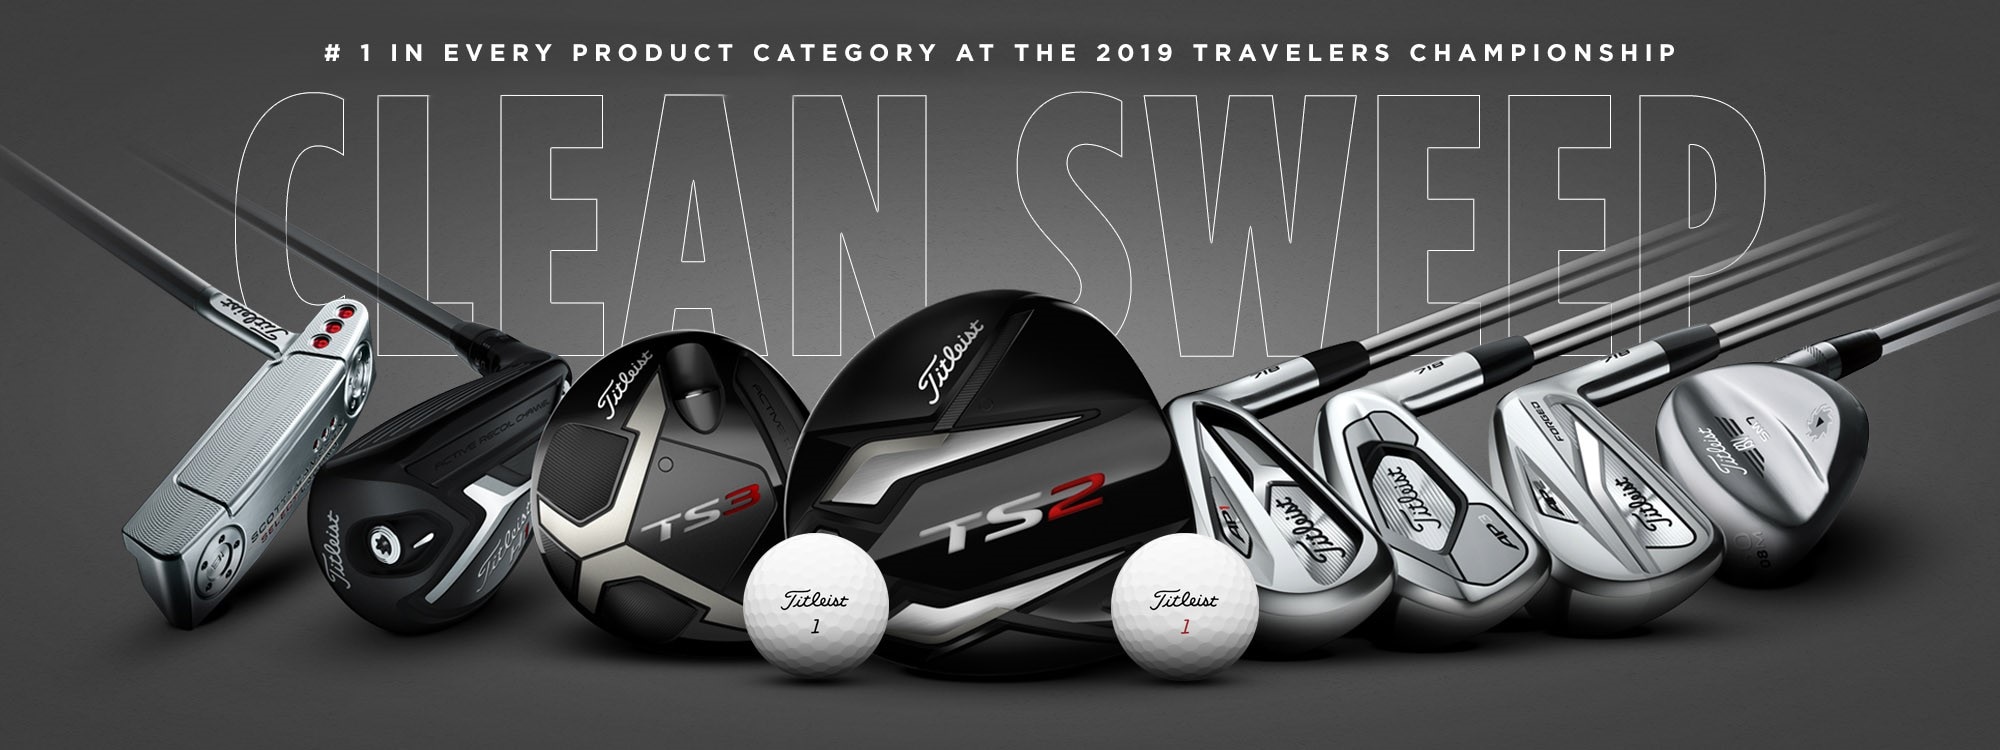 Graphic showing that Titleist was the top choice among players in every major golf equipment category at the 2019 Travelers Championship